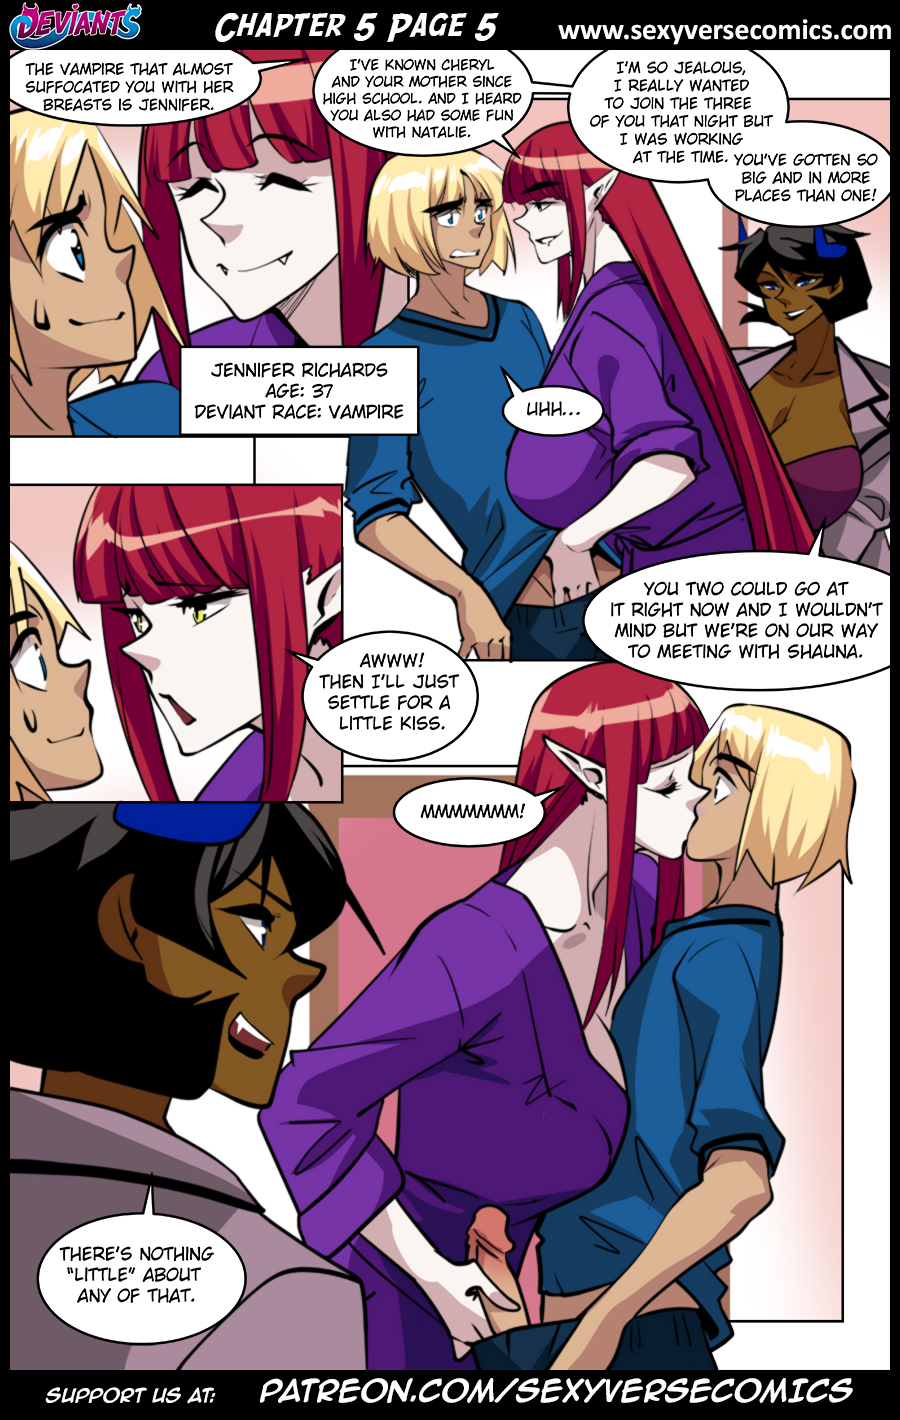 Deviants Chapter 5 Page 5